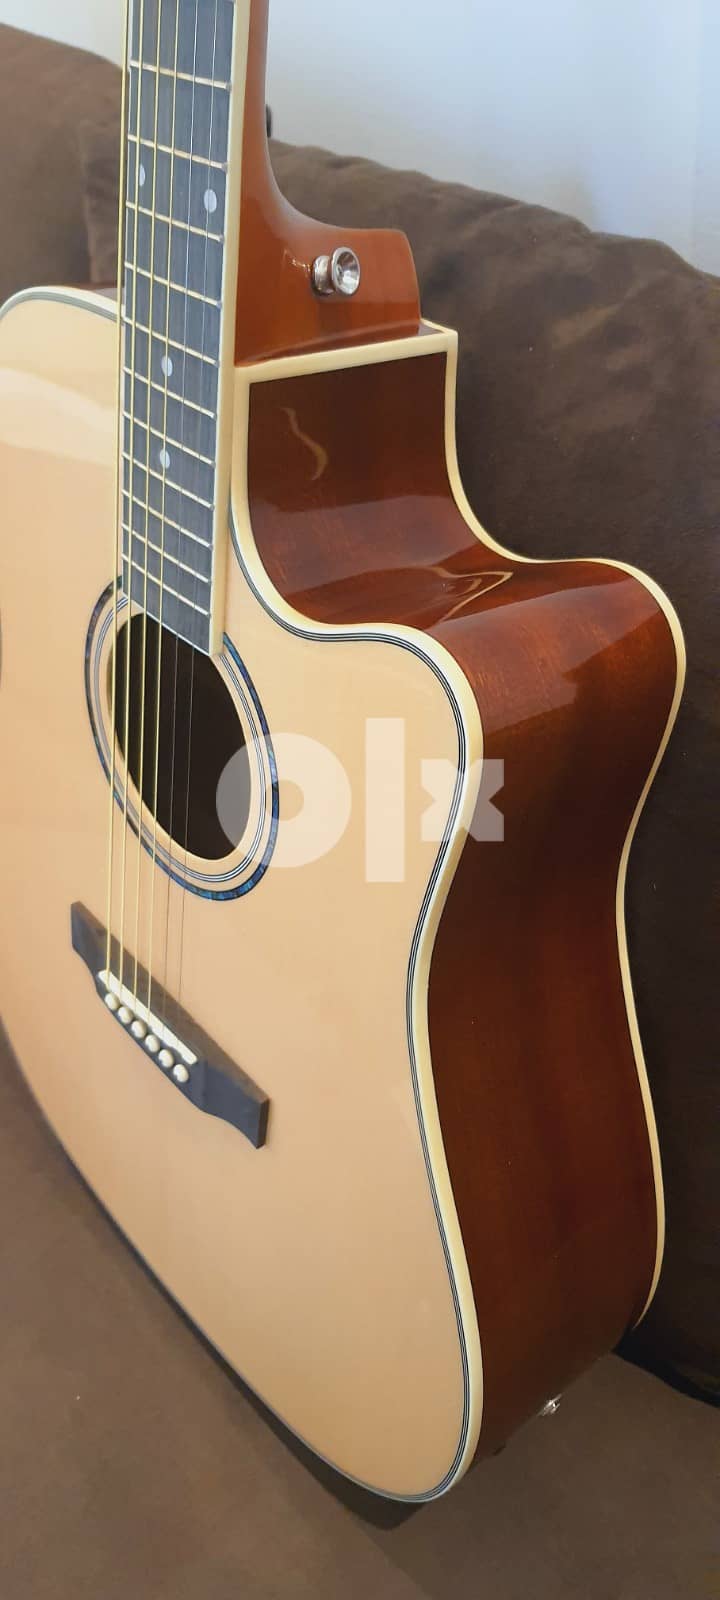 Brand New Acoustic Guitar with Built-in Pickup 1